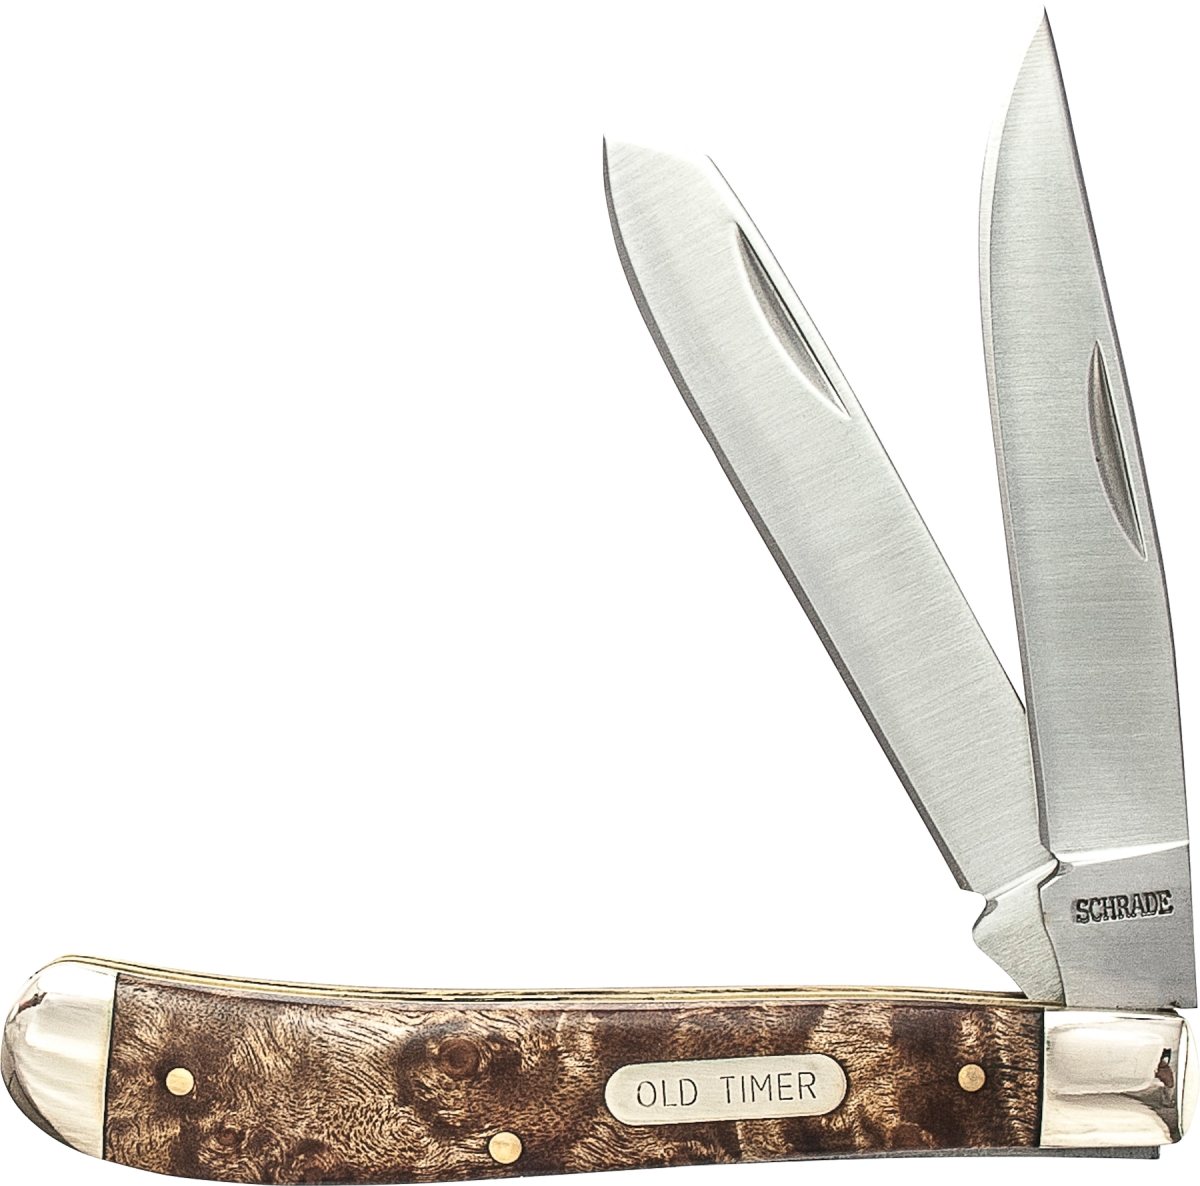 Sch-94otw 2019 3.87 In. Schrade Old Timer Gunstock Trapper Closed 2-blade With Iron Wood Handle